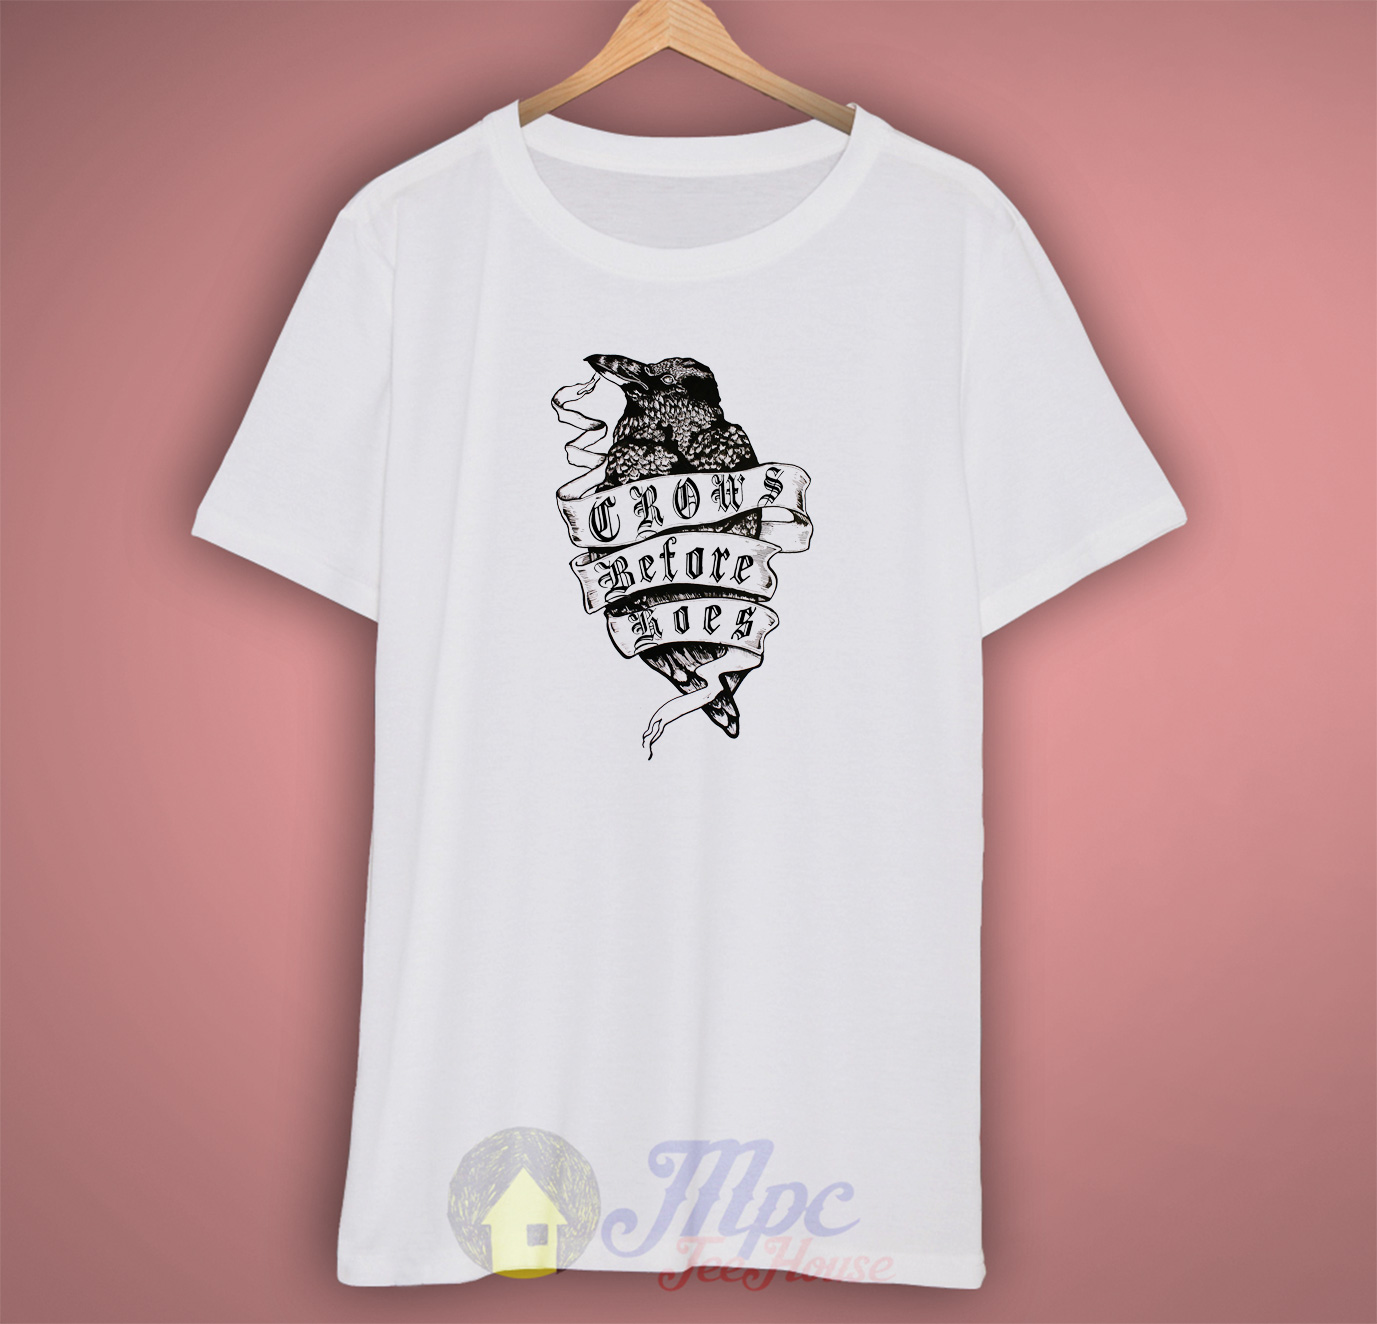 The Crows Before Hoes Jon Snow T Shirt – Mpcteehouse: 80s Tees